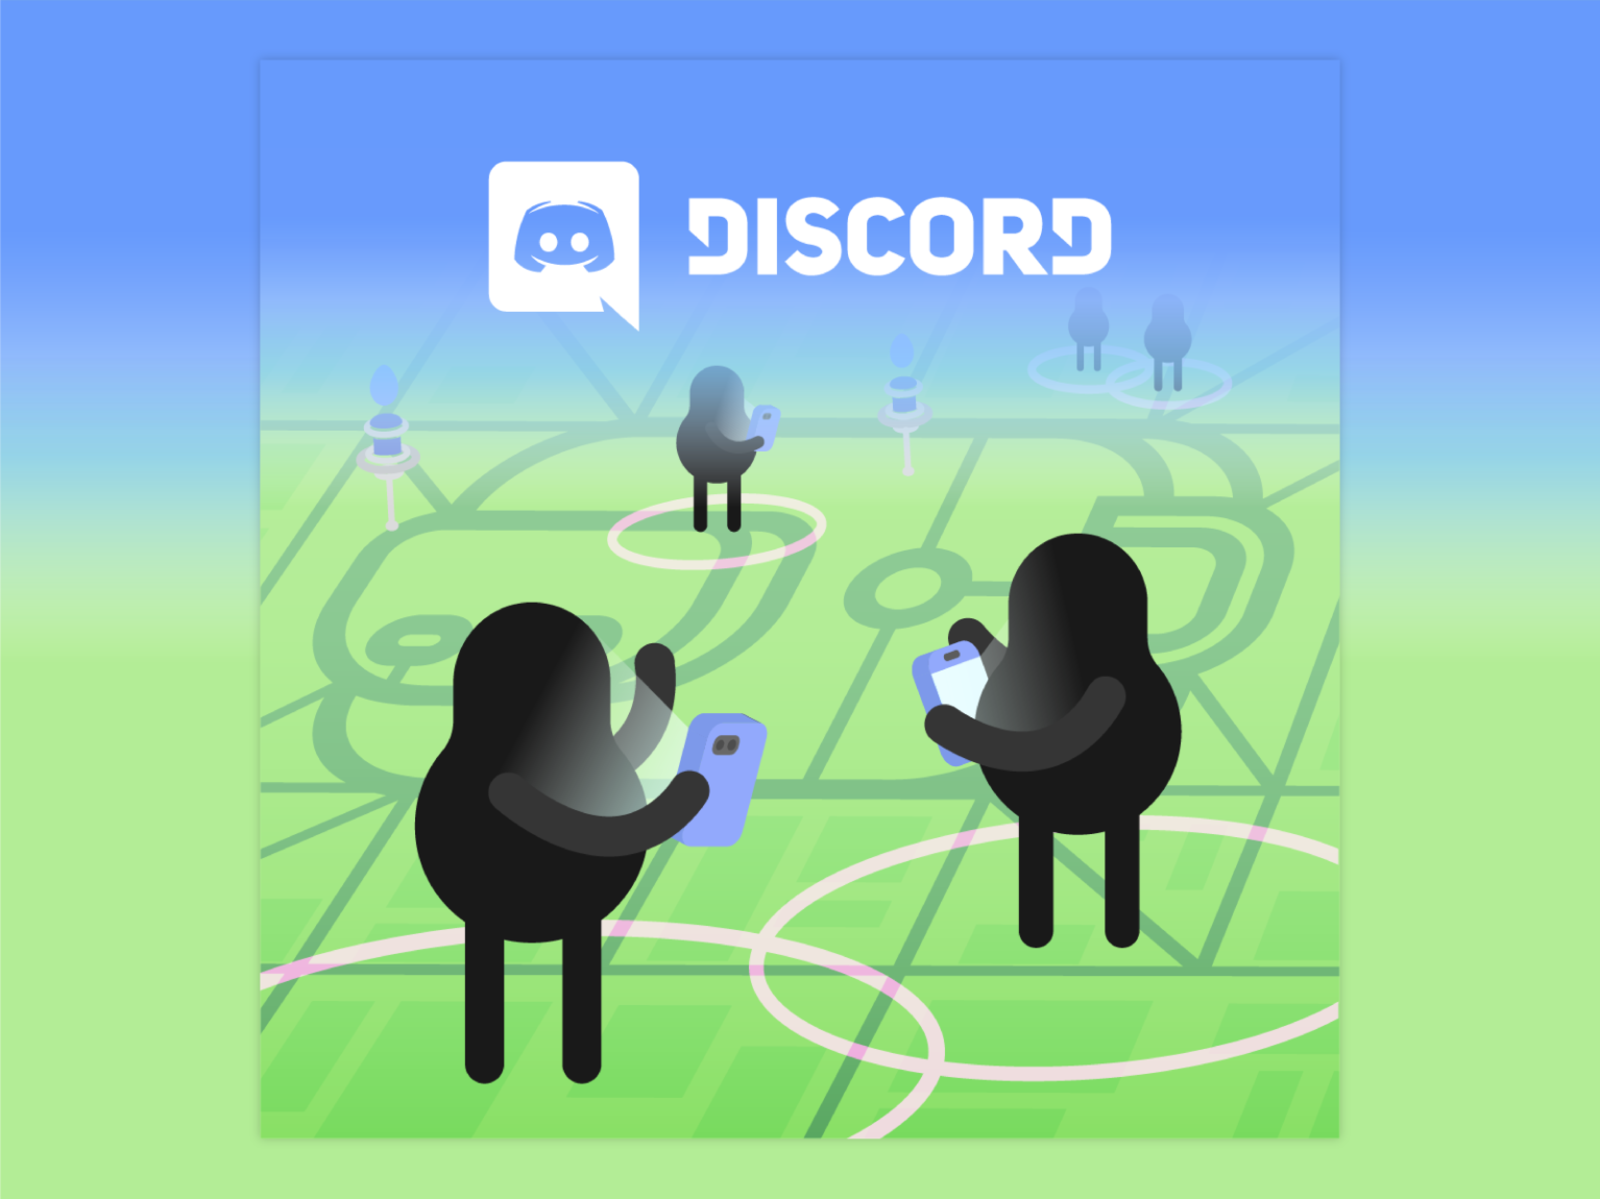 Discord X Pokemon Go Ads By Fiona Tran For Discord On Dribbble